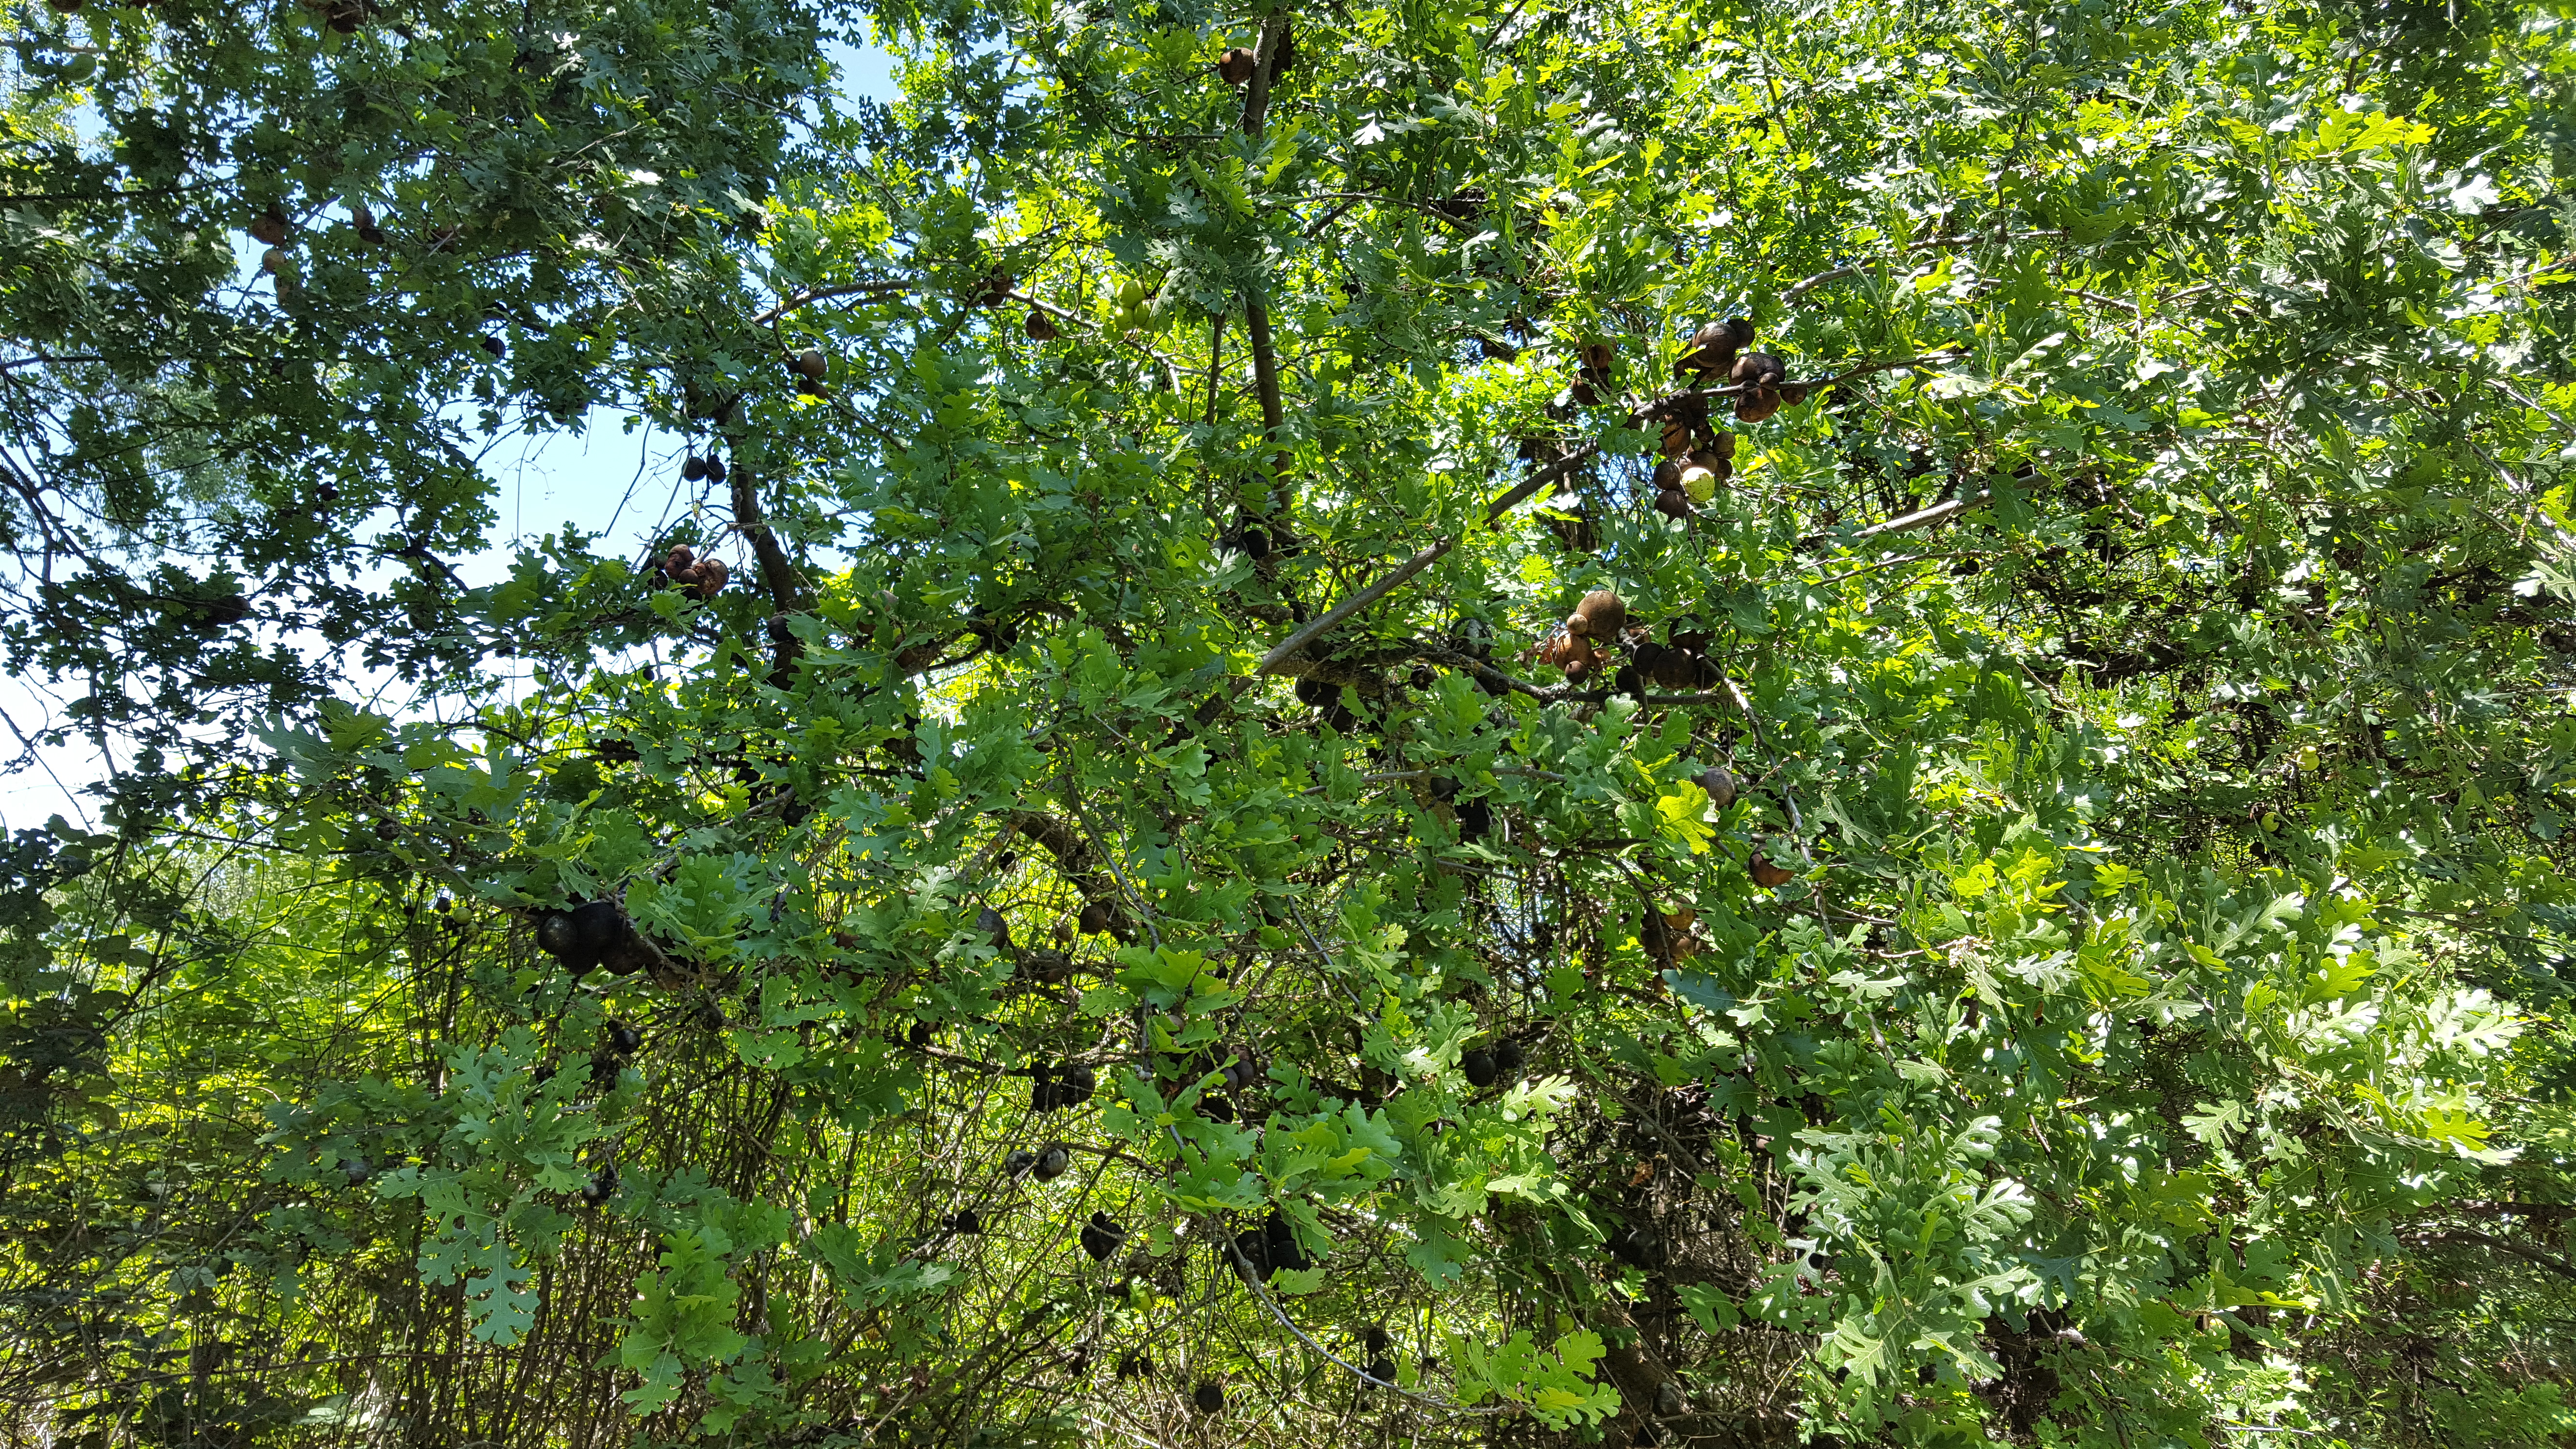 View underneath an oak tree, showing lobed leaves with light penetrating them